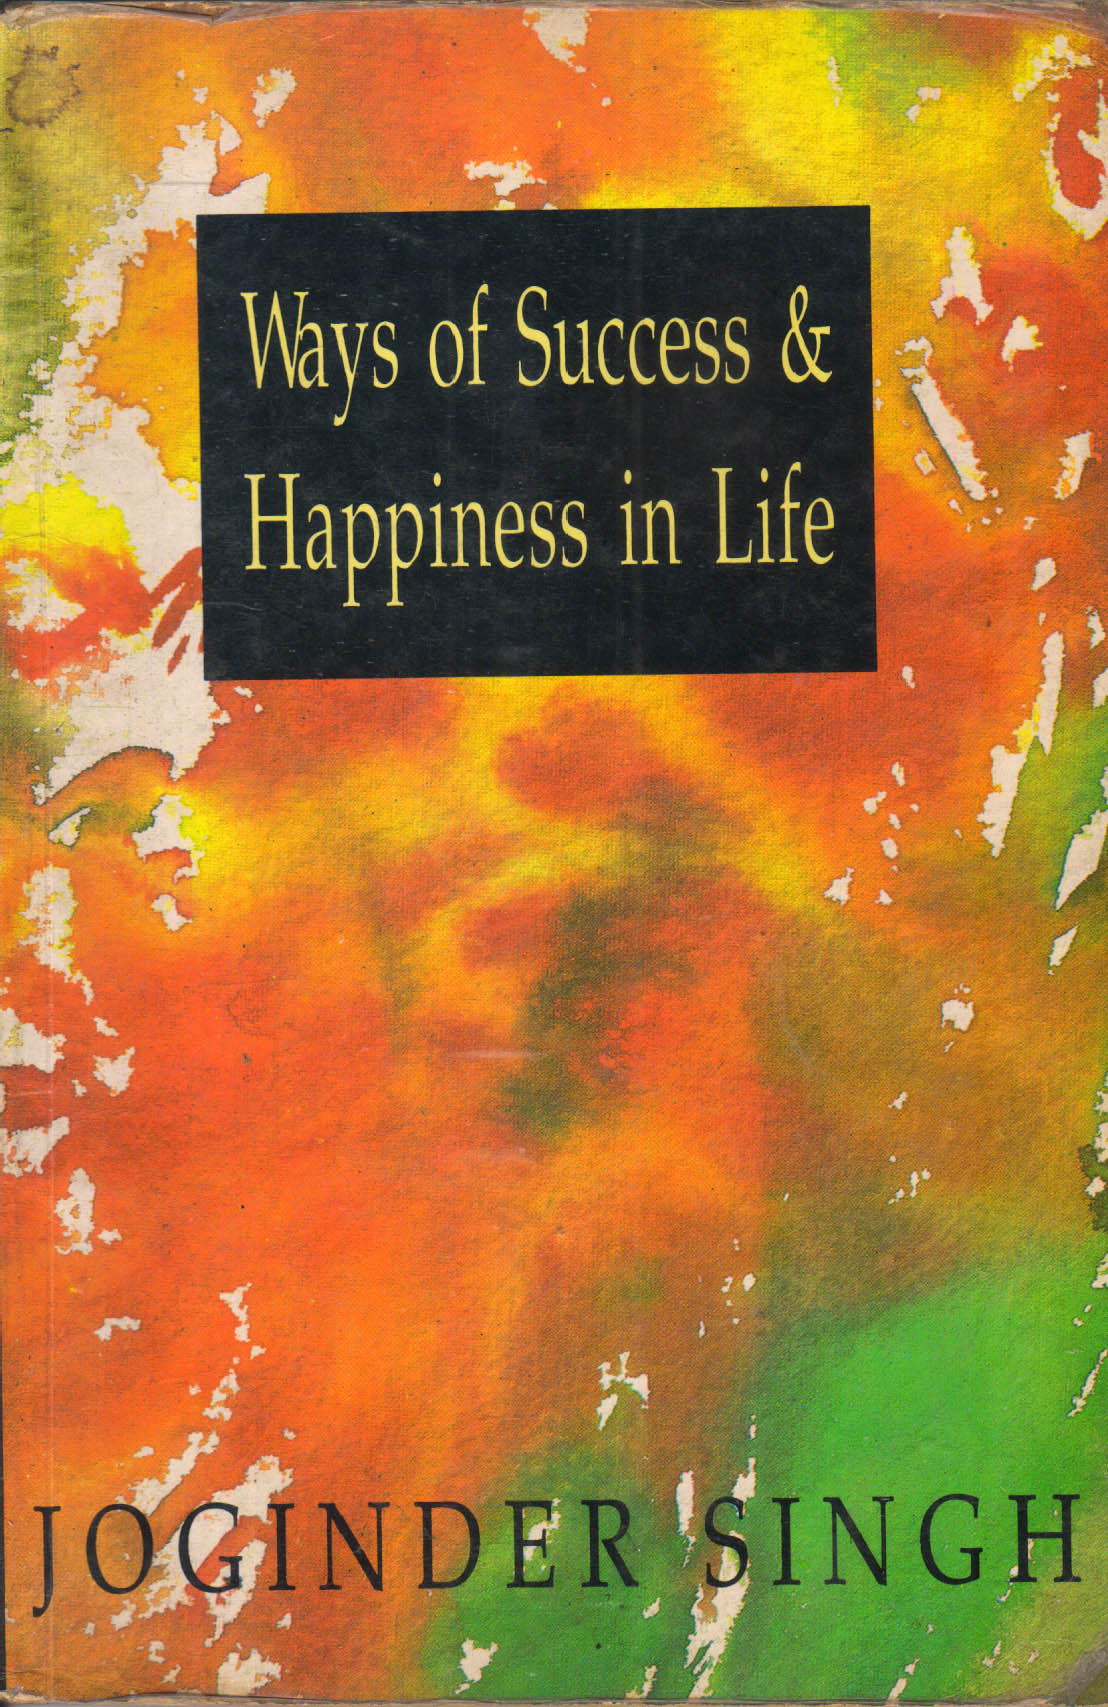 Way Of Success & Happiness In Life